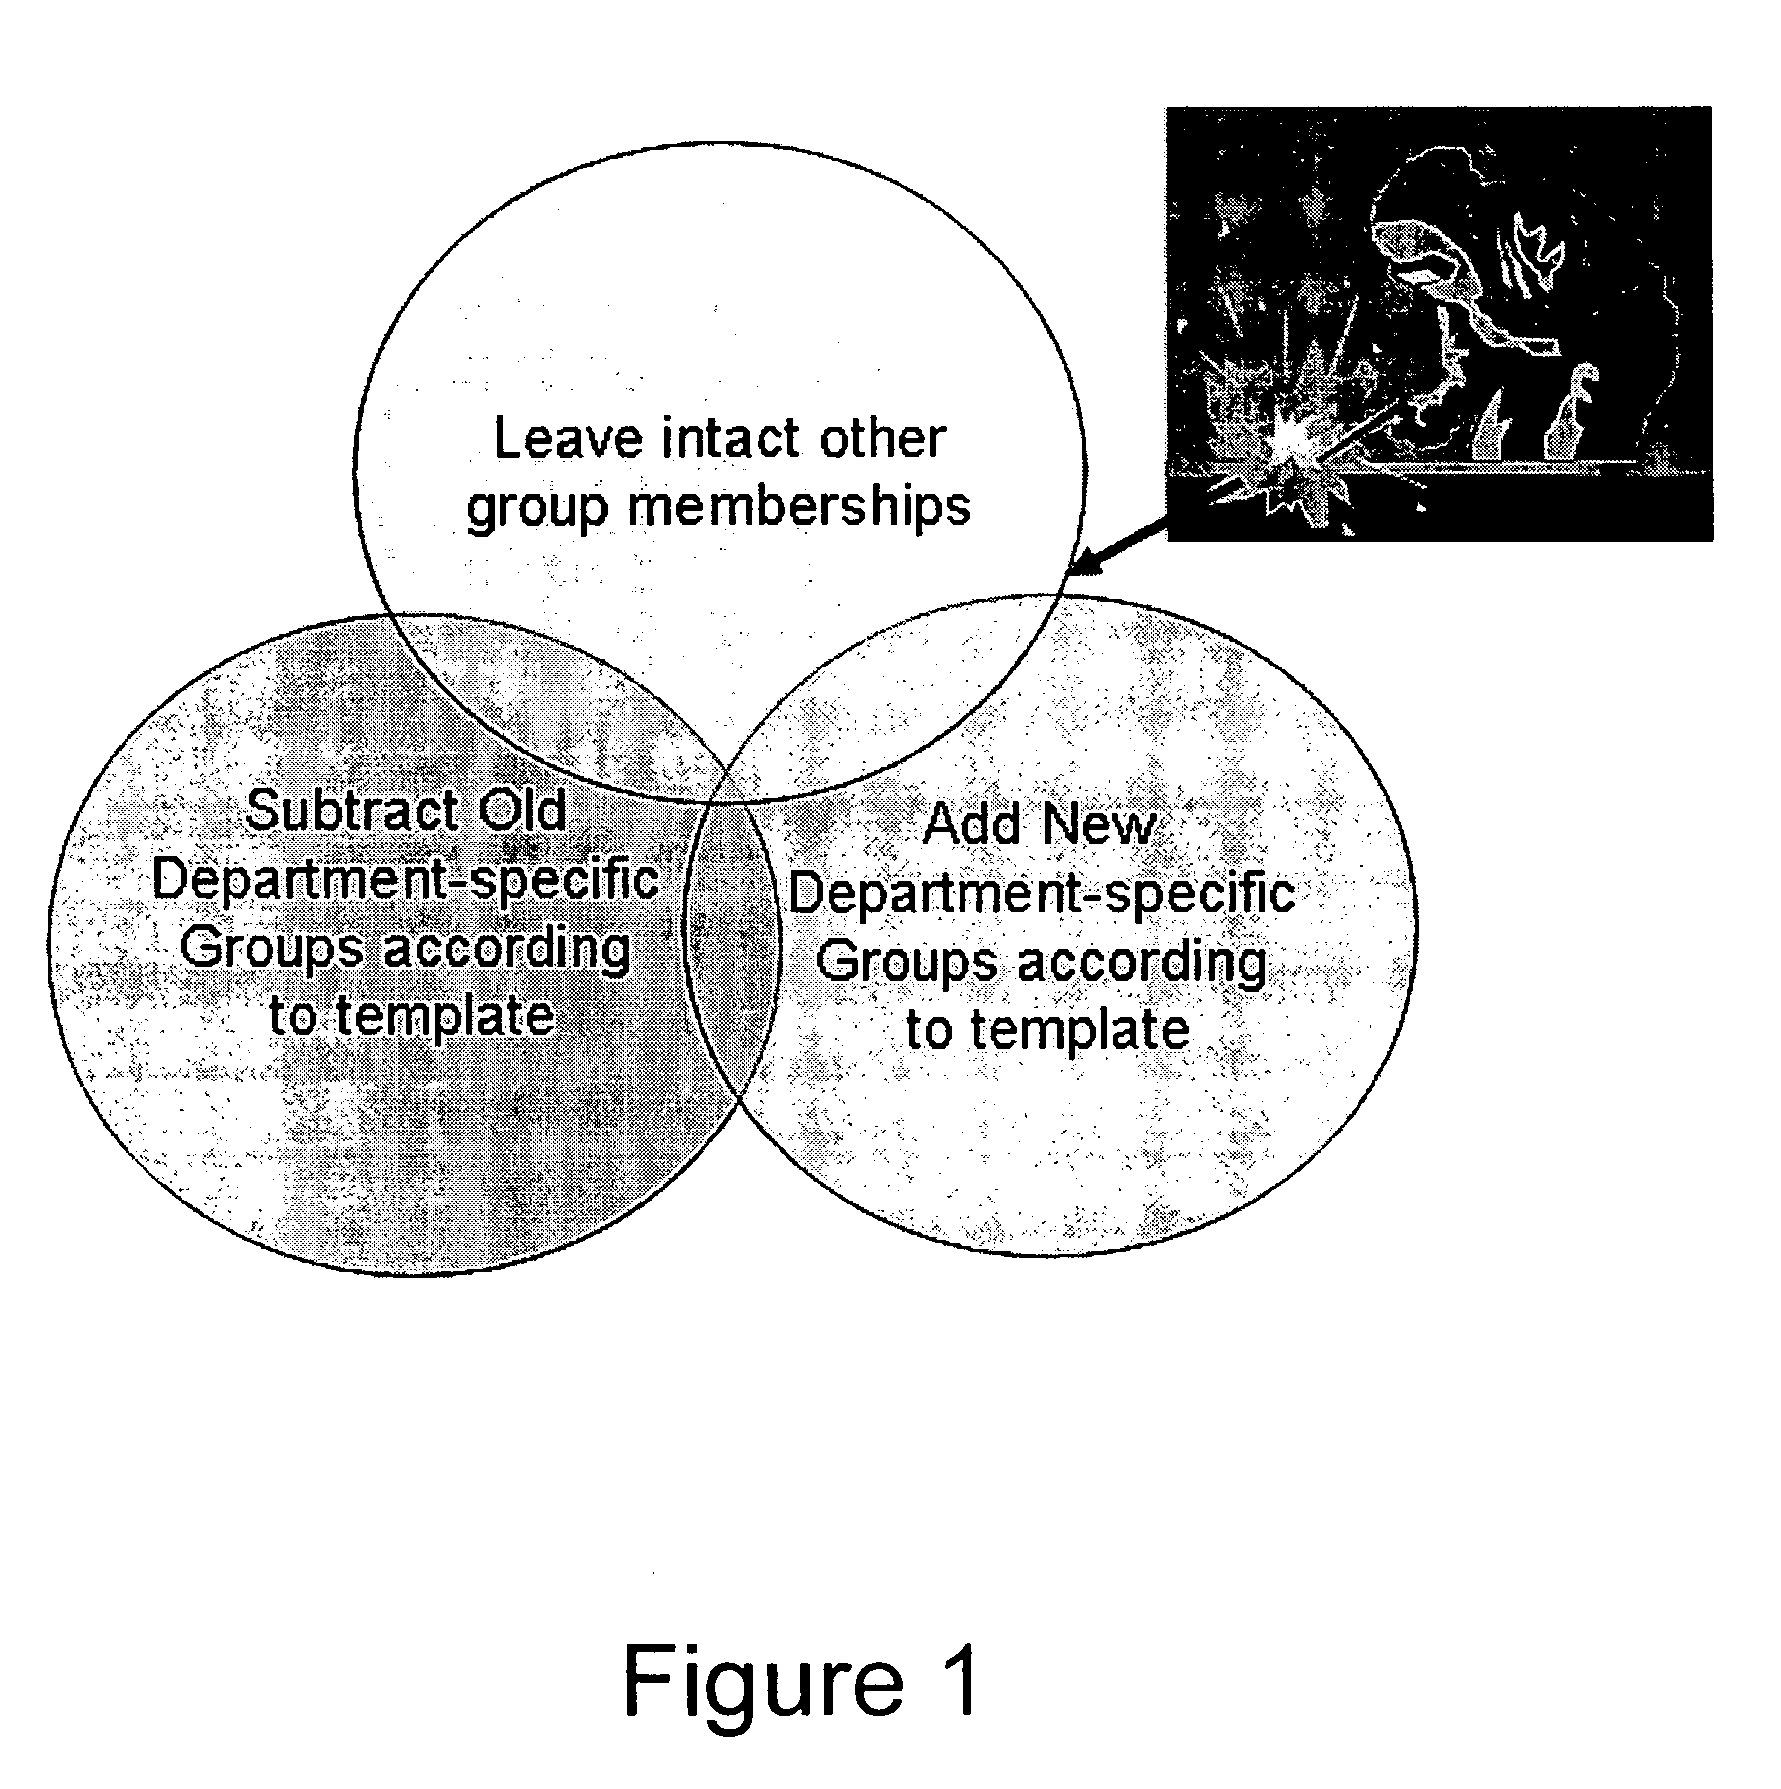 Methods, systems and computer program products for changing objects in a directory system